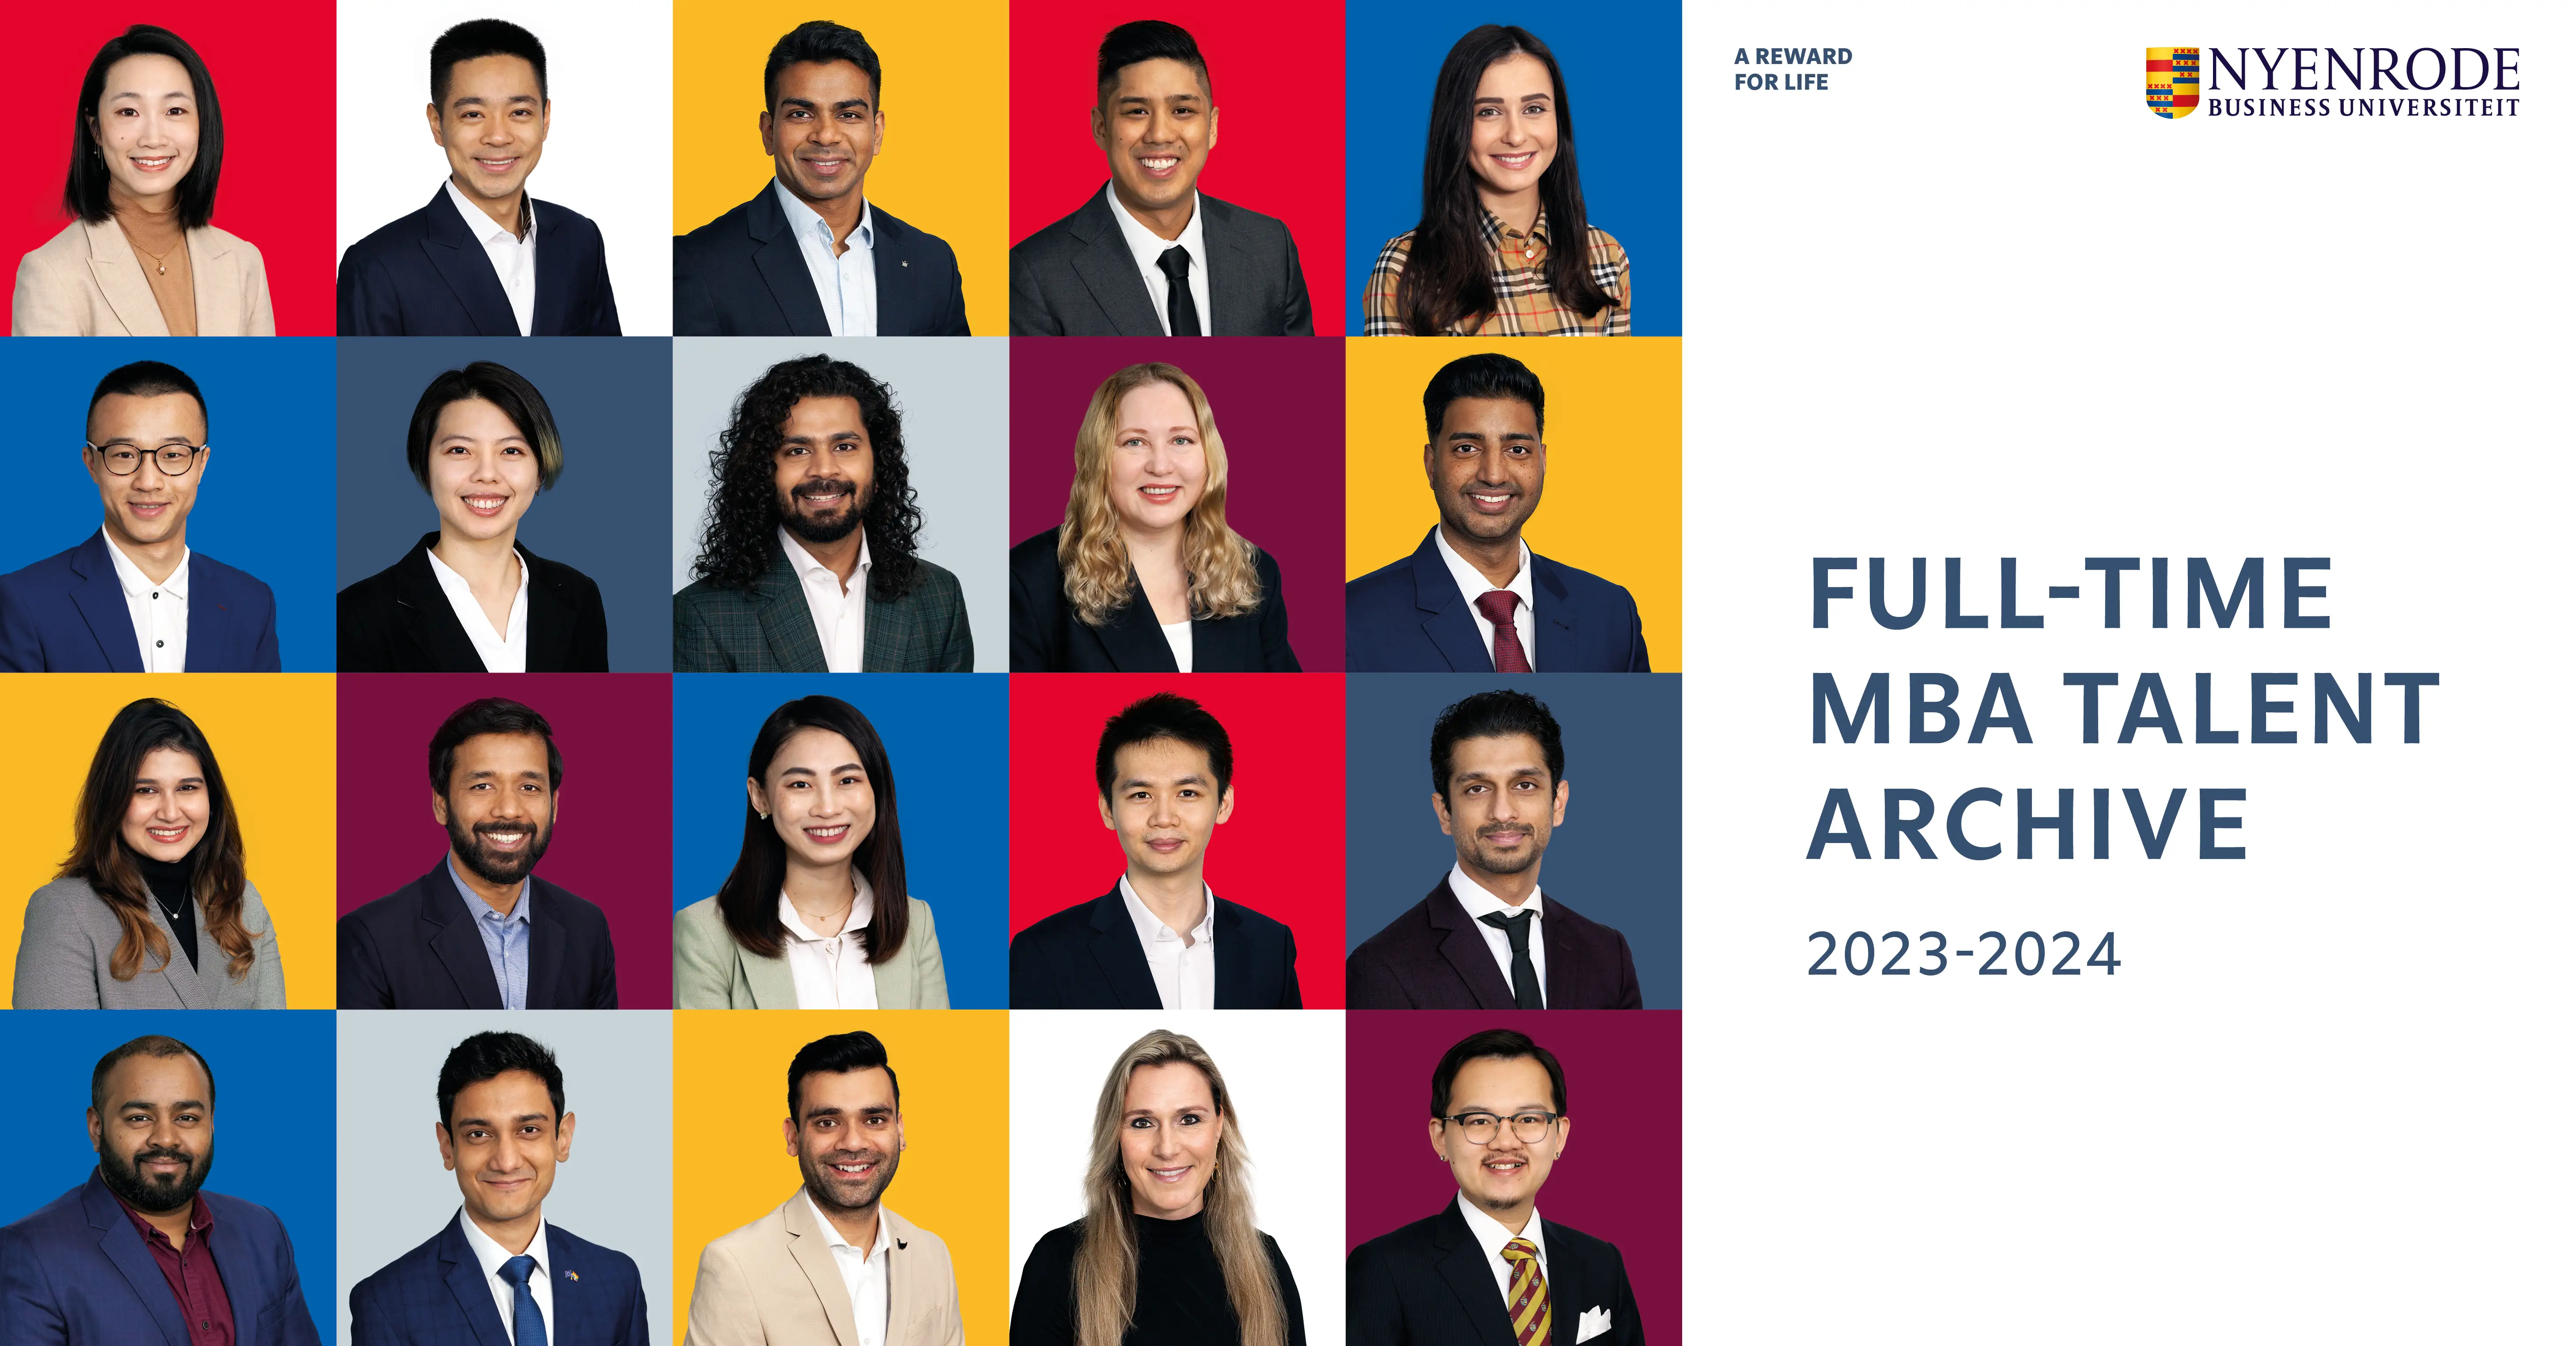 Nyenrode Talent Archive Fulltime MBA Class of 2023-2024